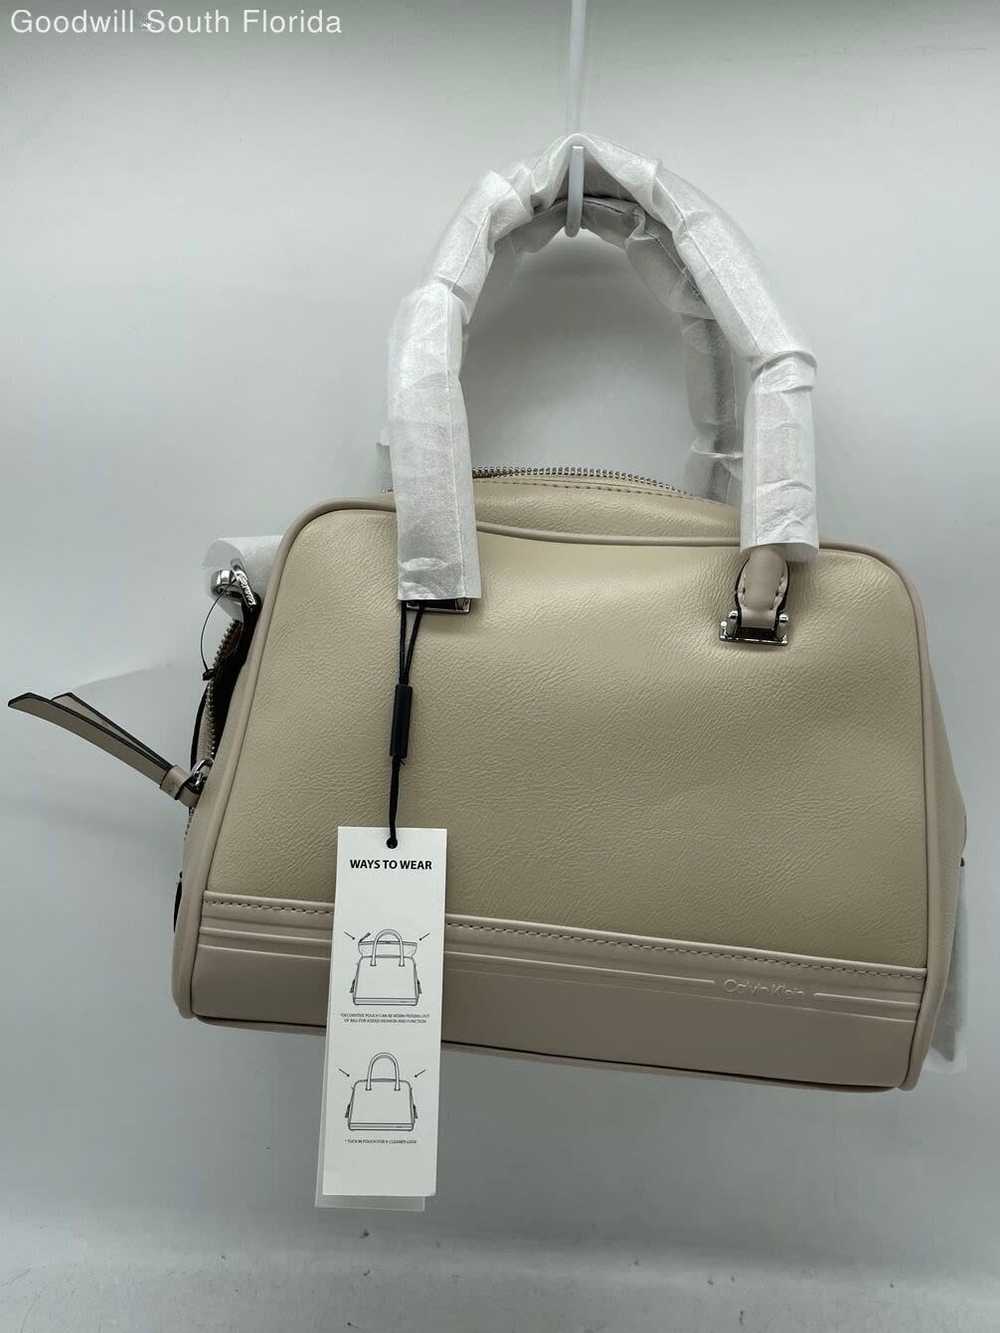 Calvin Klein Light Beige Purse With Tag - image 1